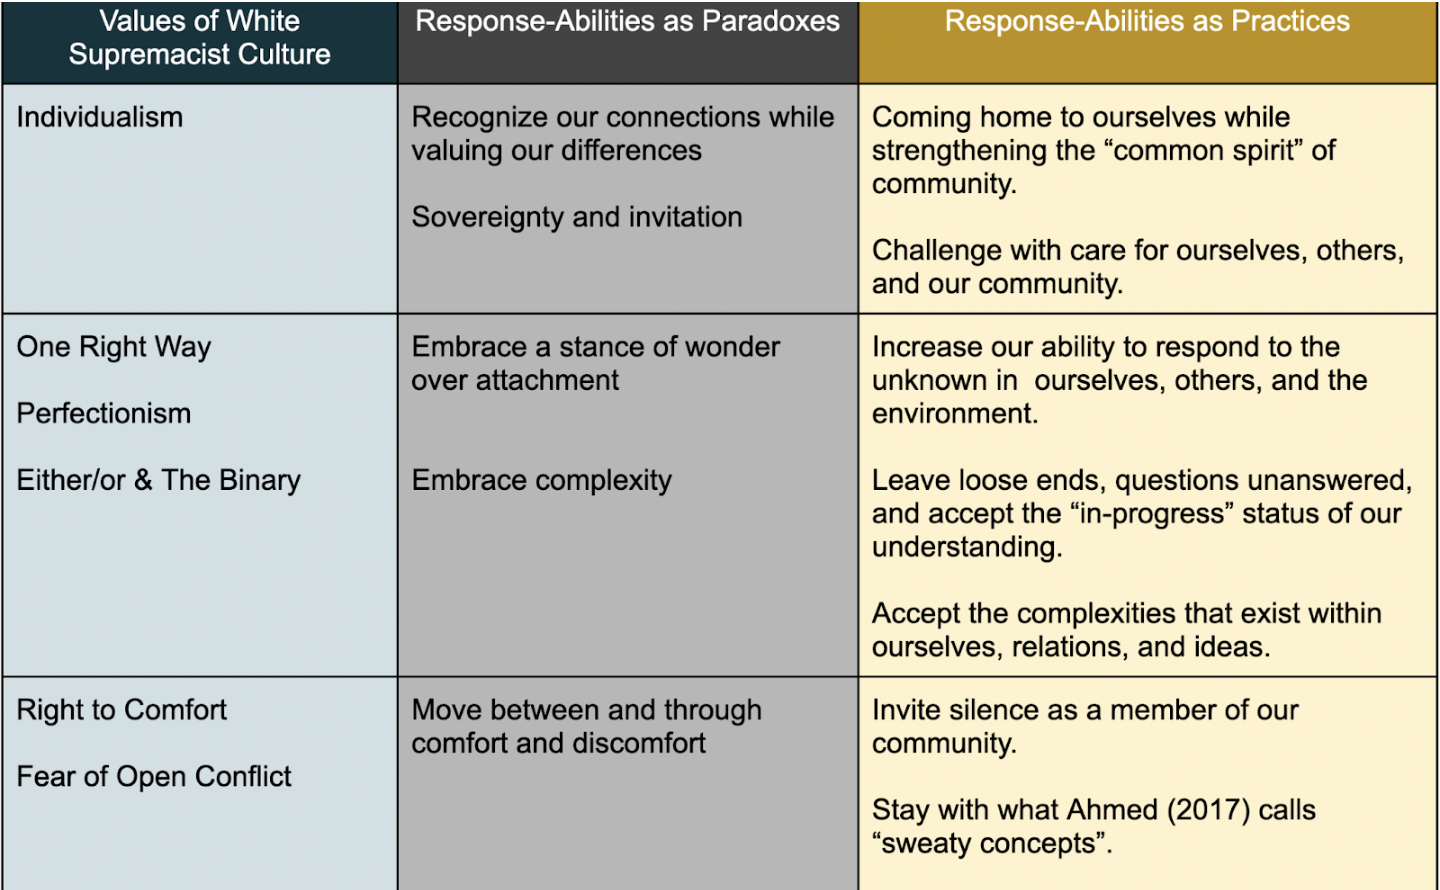 response-abilities as practices chart